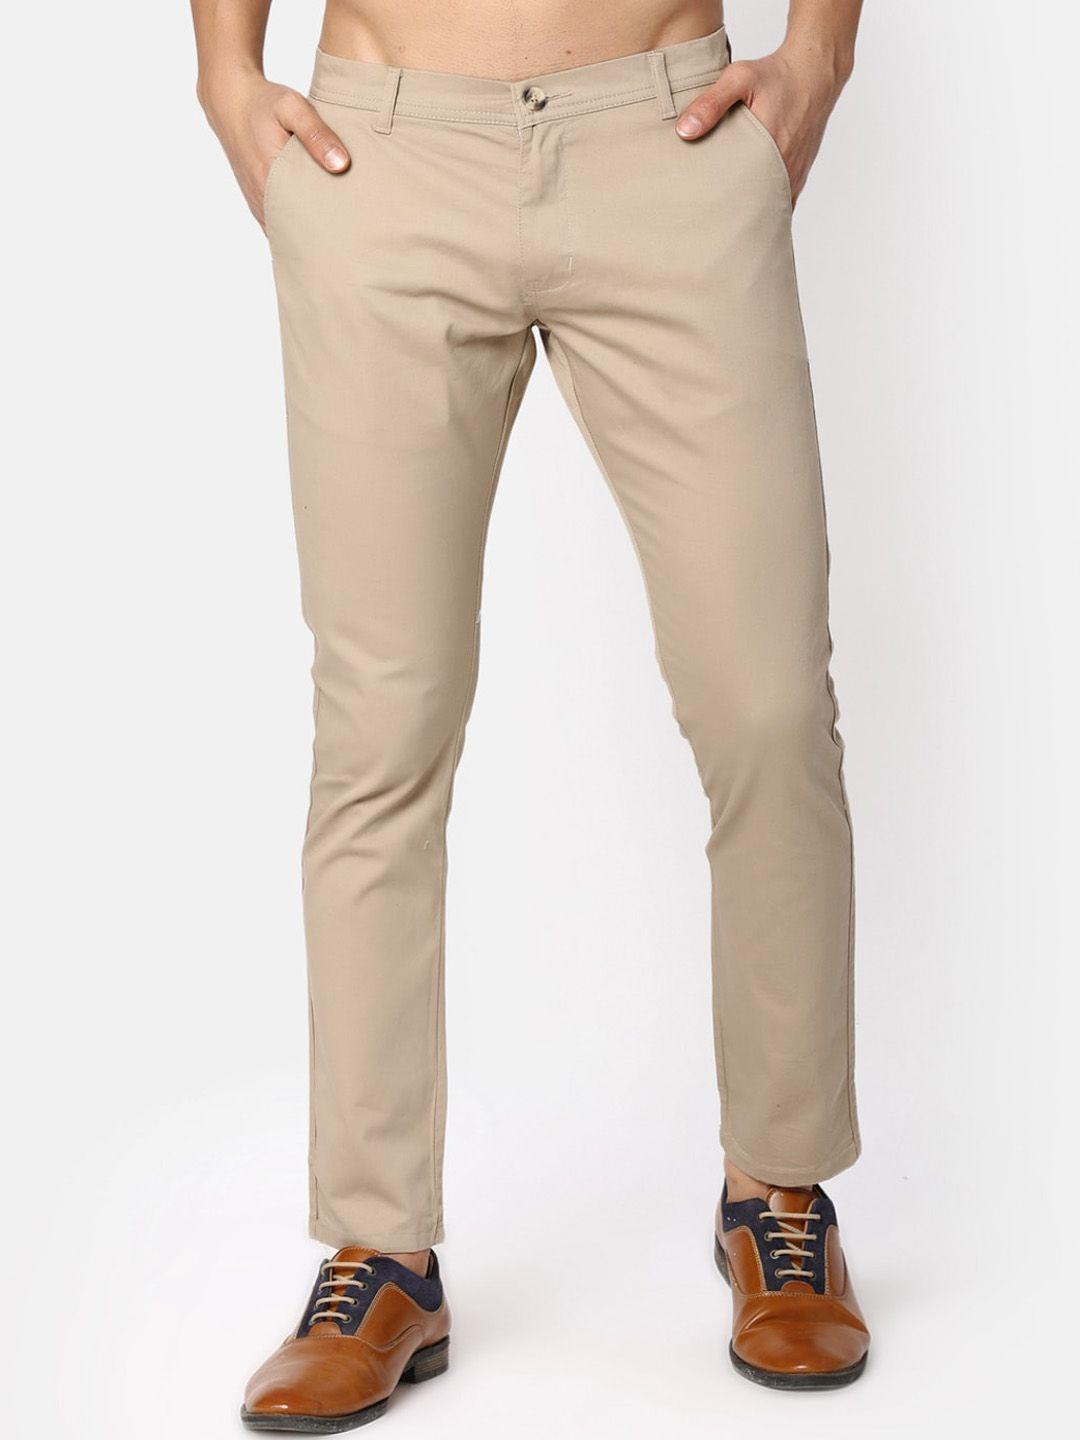 v-mart-men-cotton-chinos-trousers